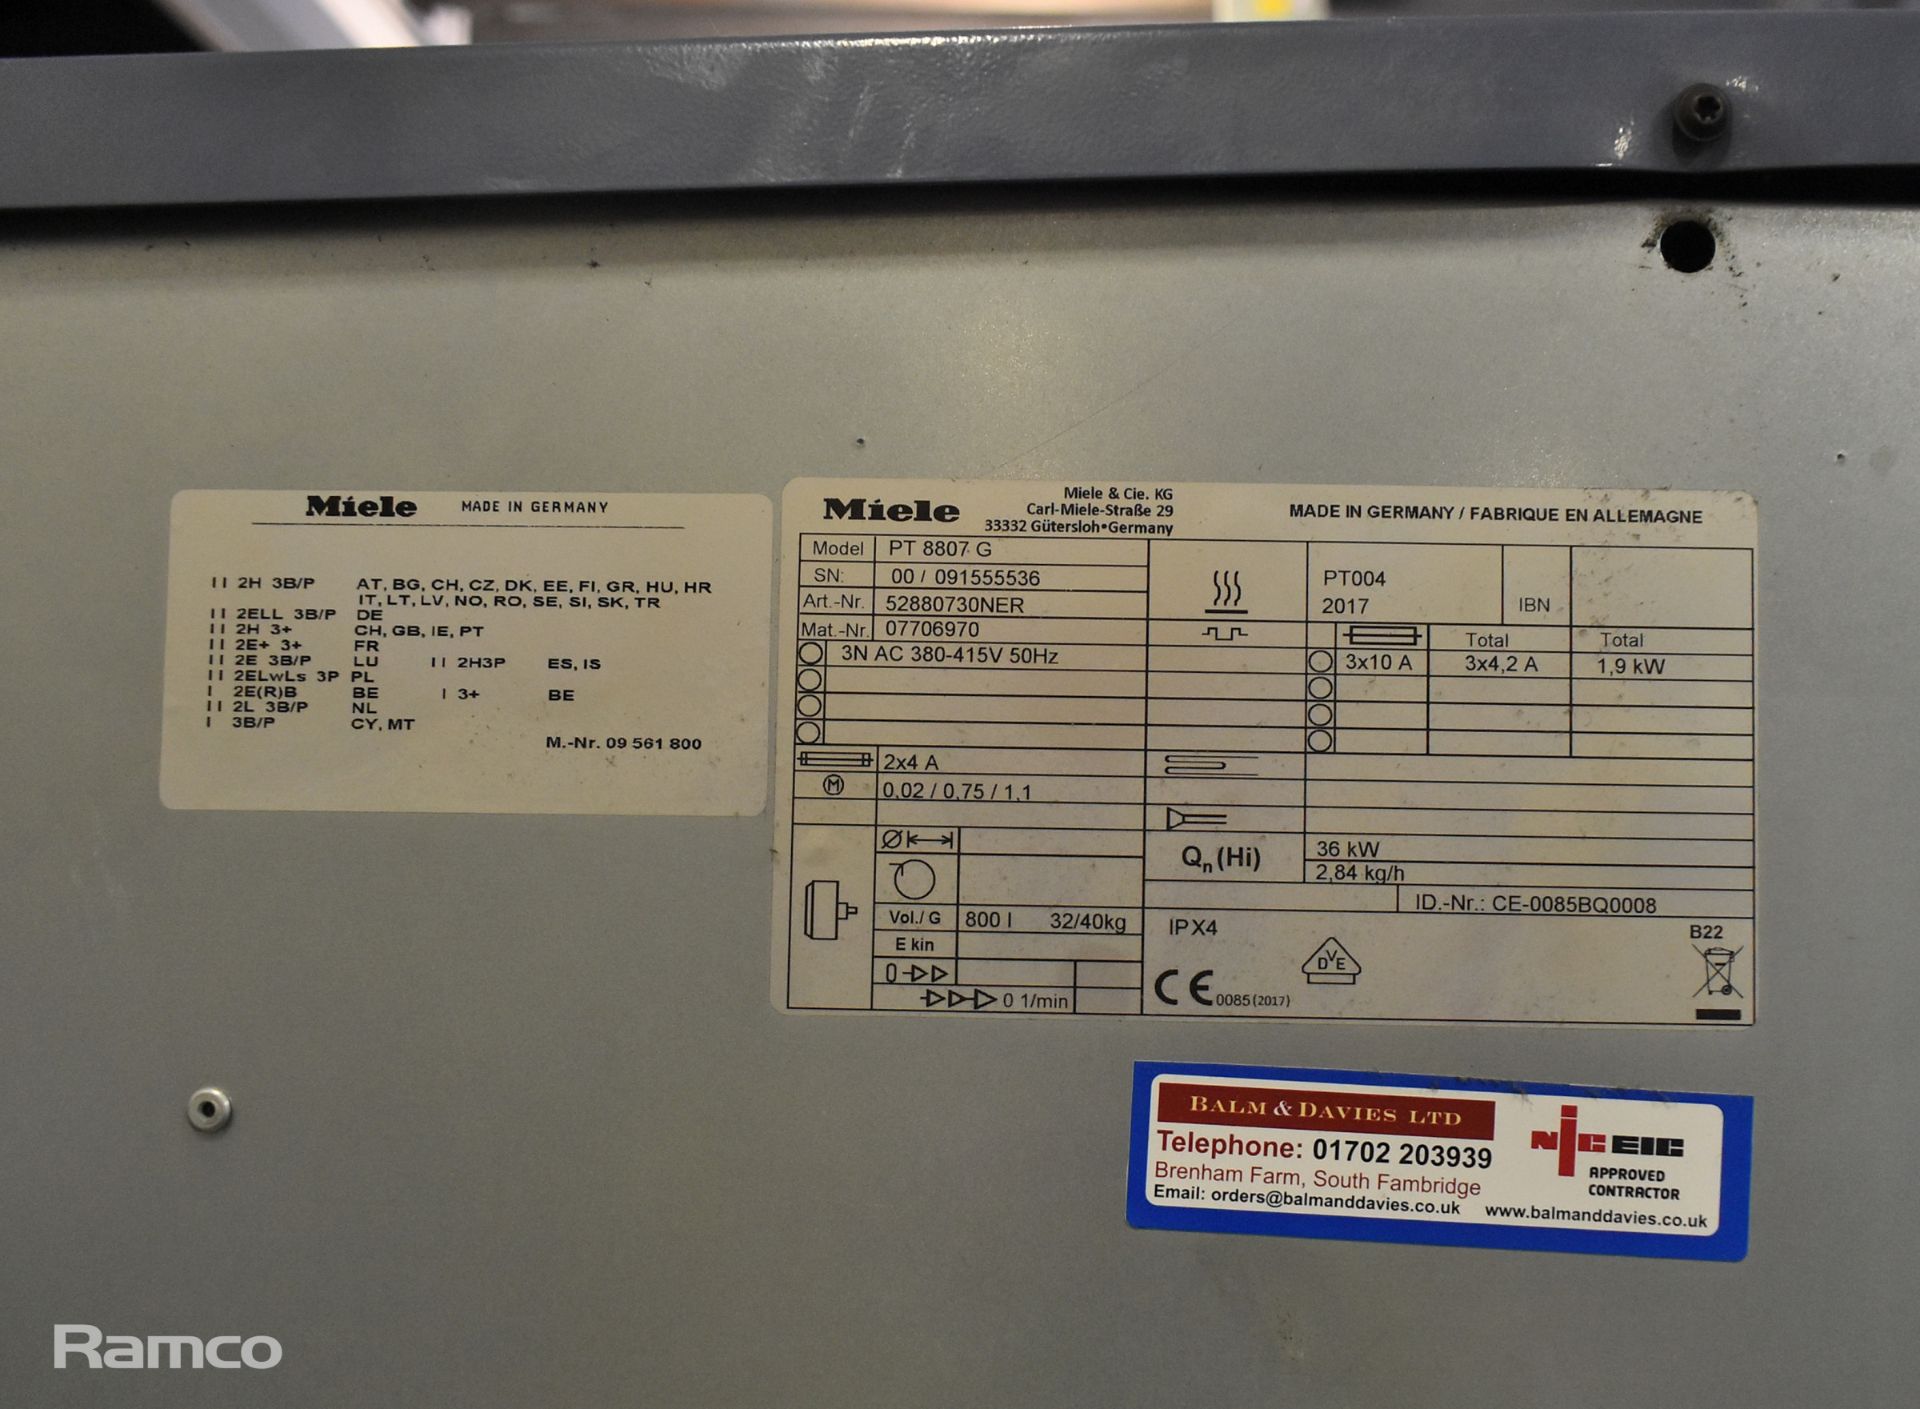 Miele Profesional PT 8807 G commercial tumble dryer - W 1200 x D 1320 x H 1730 mm - Image 10 of 11